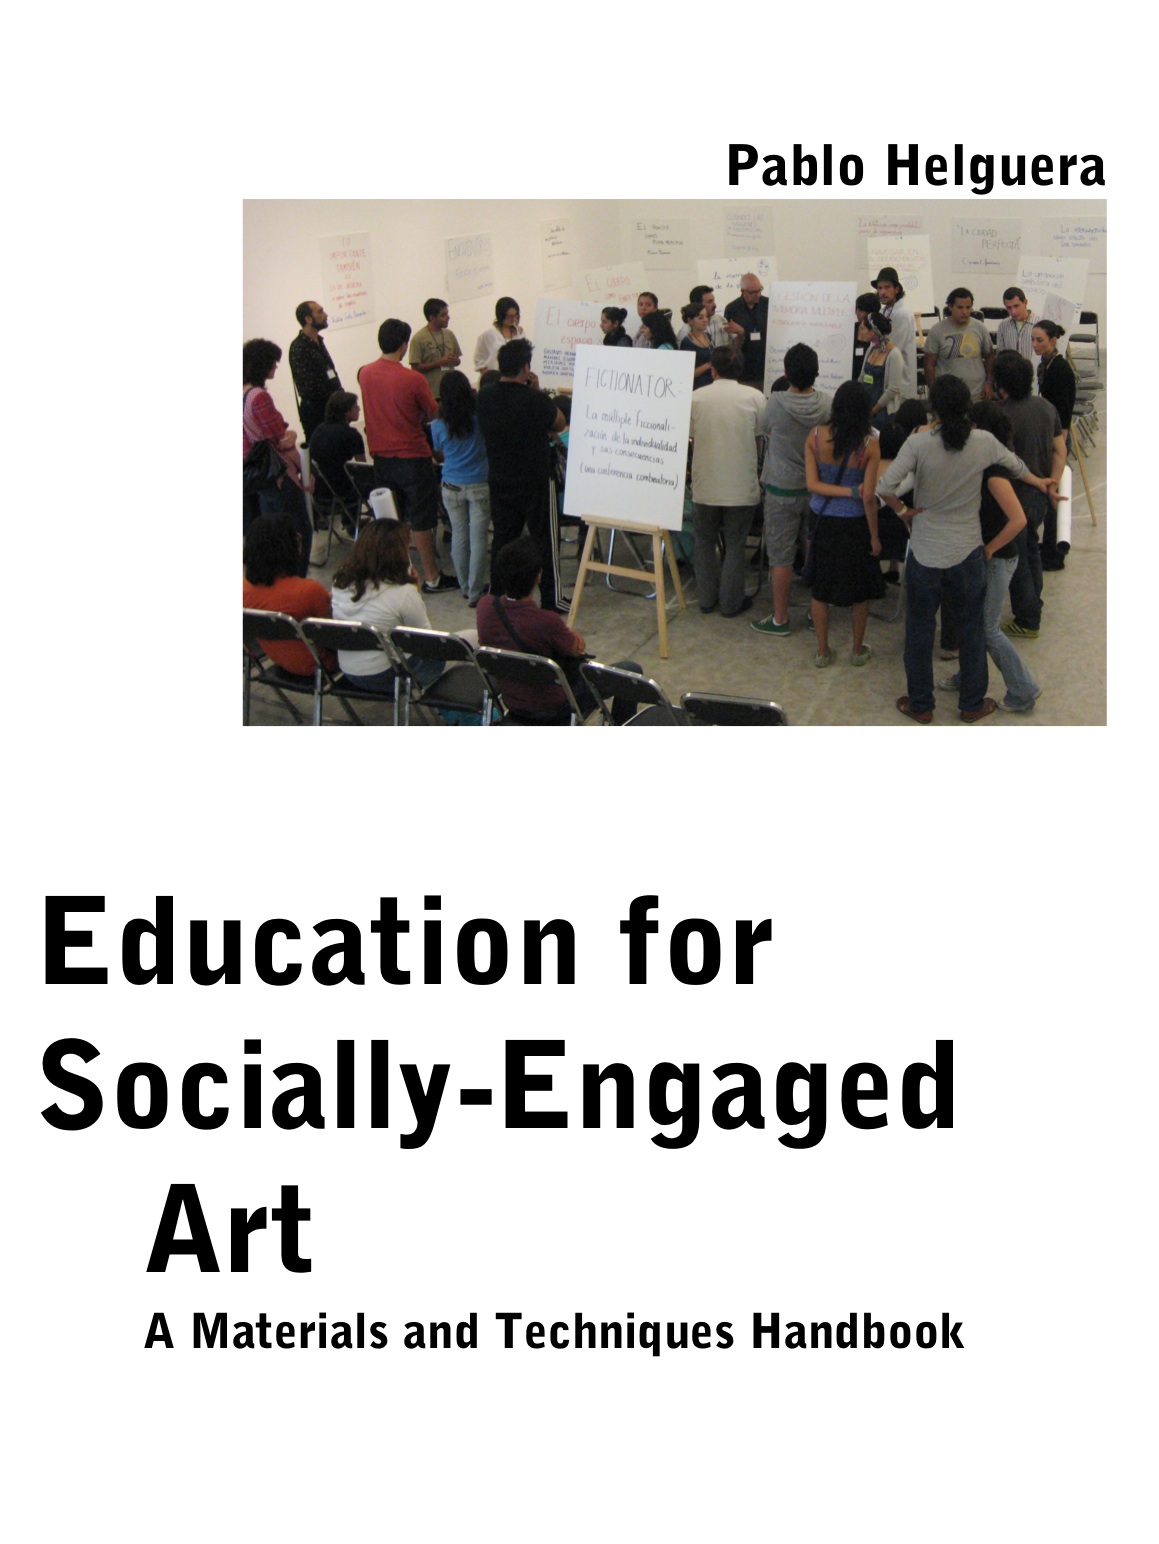 Arts administration as social practice interview